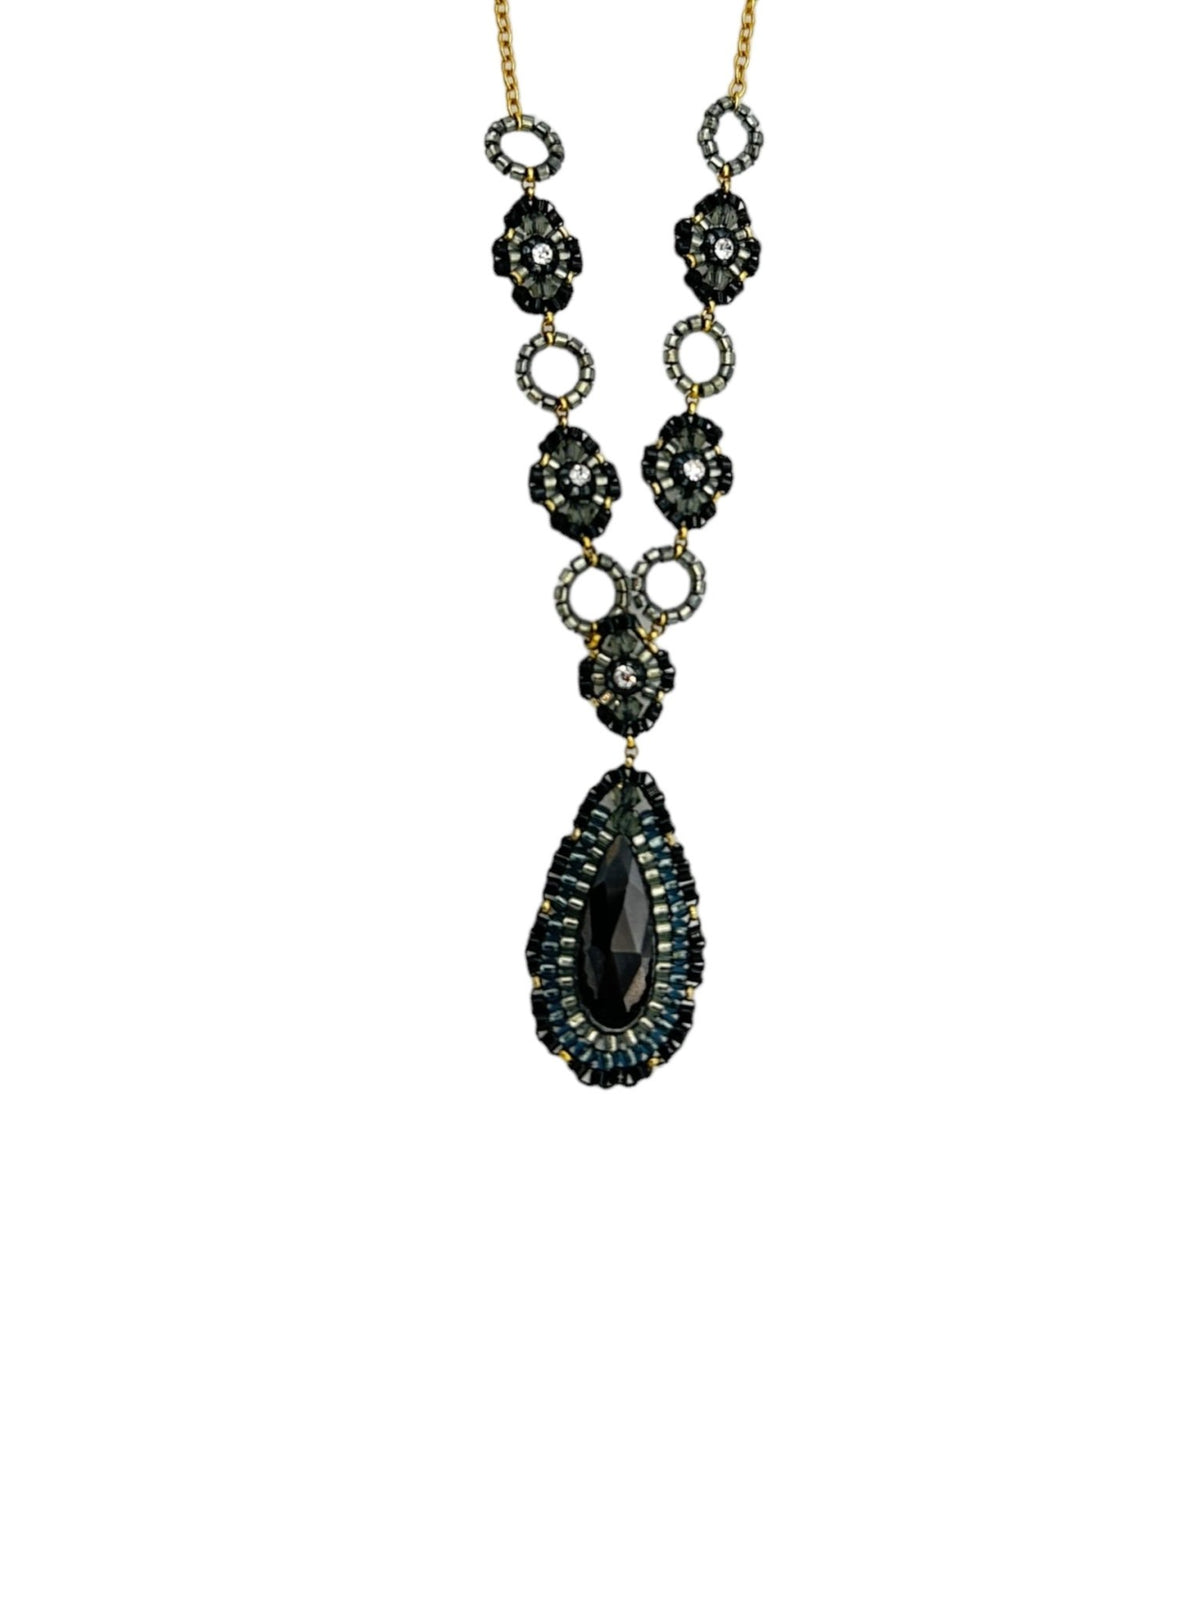 Miguel Ases Designer Black Teardrop Beaded Strand Layering Gold-Filled Necklace - 24 Wishes Vintage Jewelry